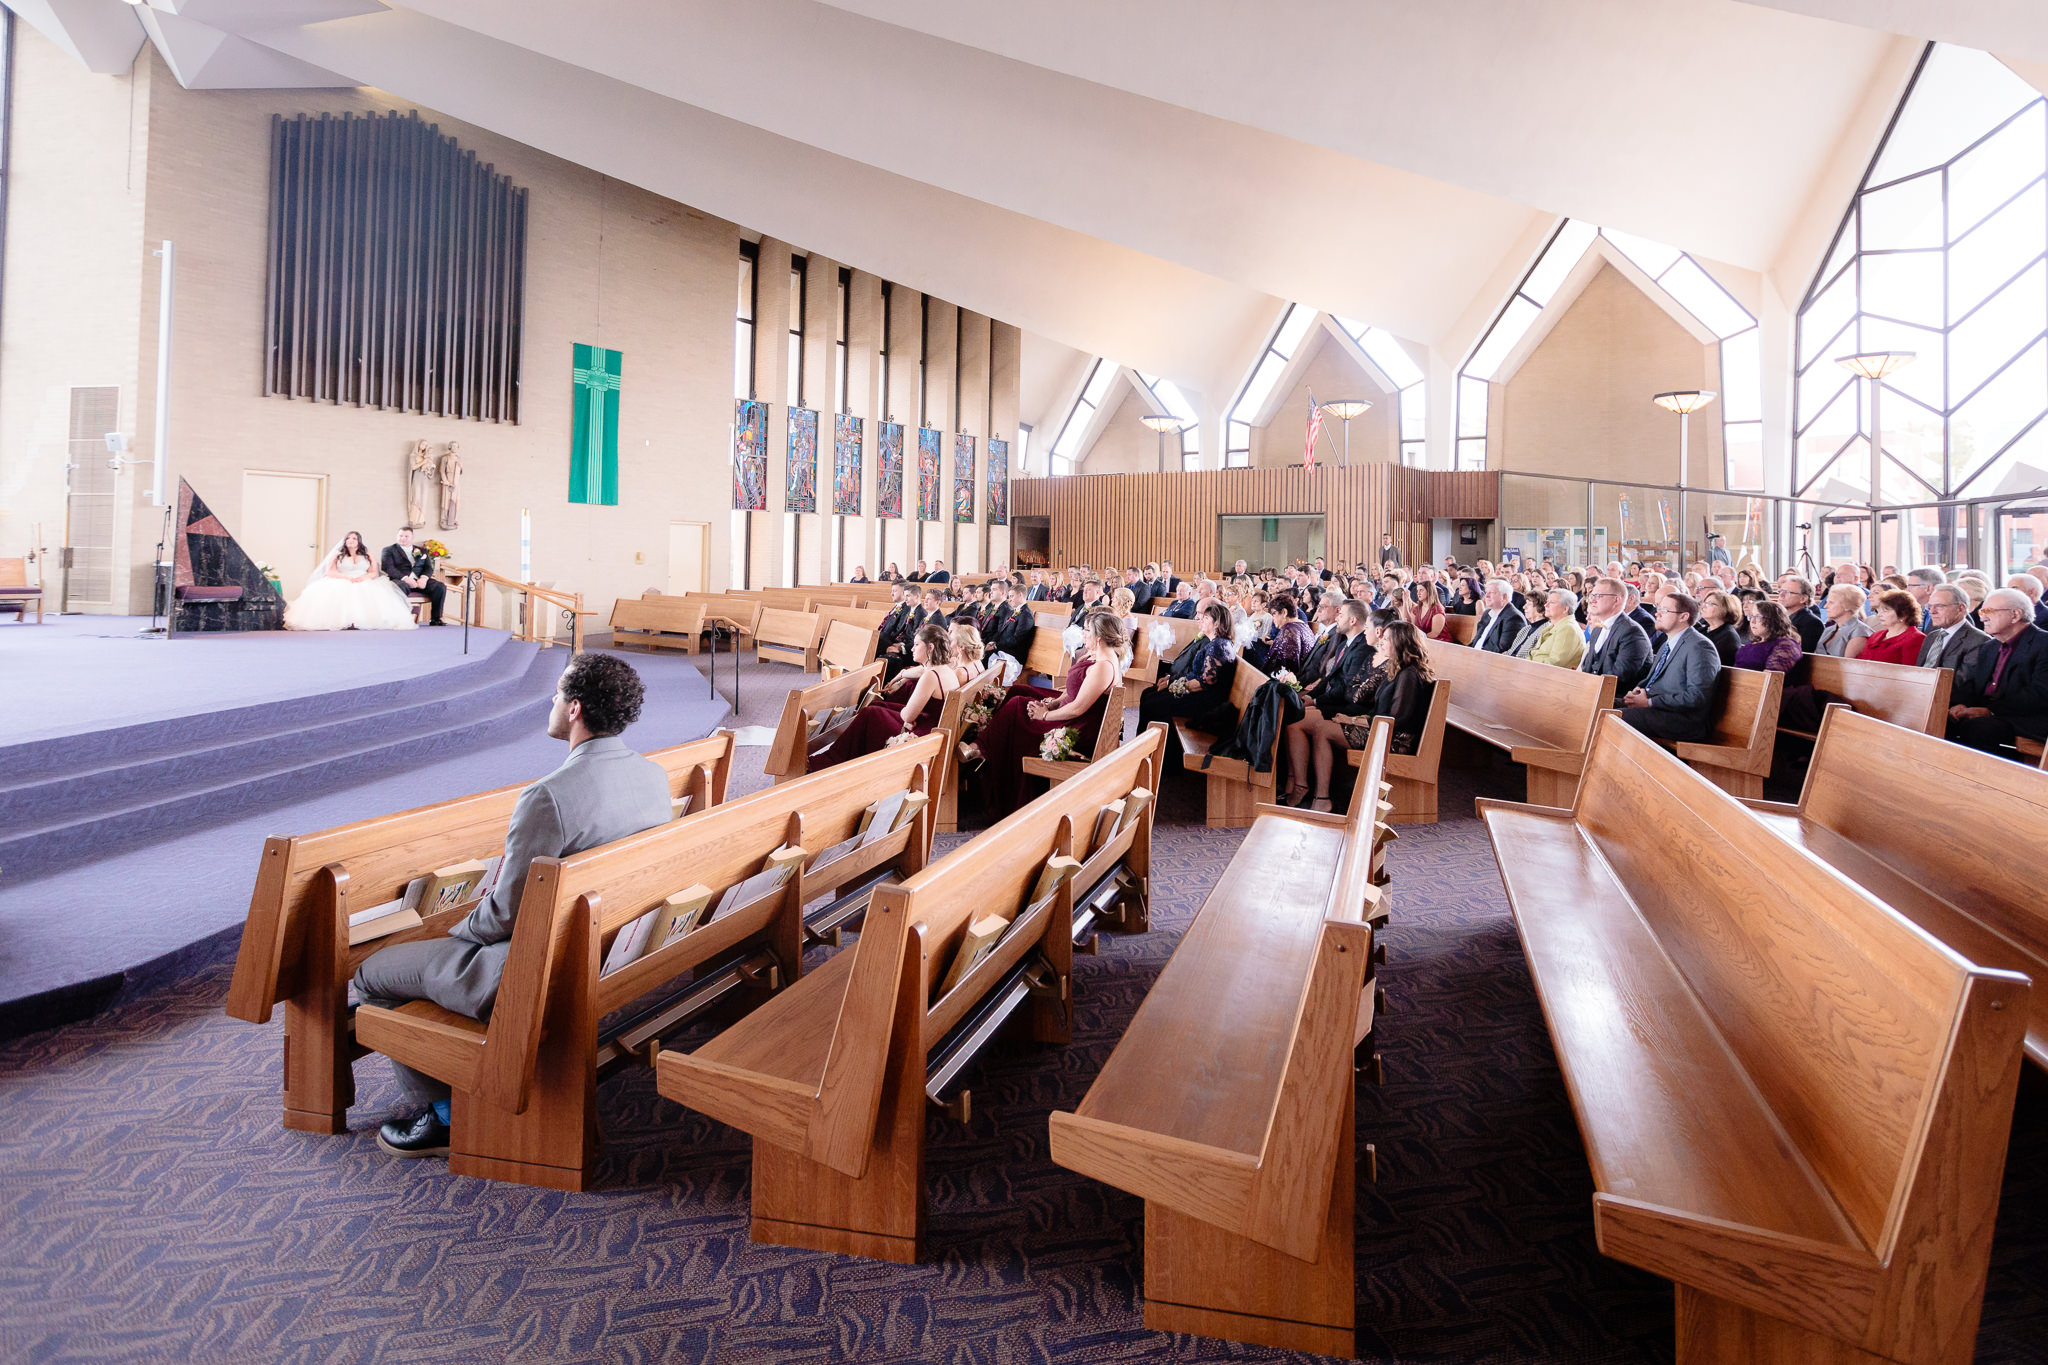 Guests in the pews at St. Malachy during a wedding ceremony